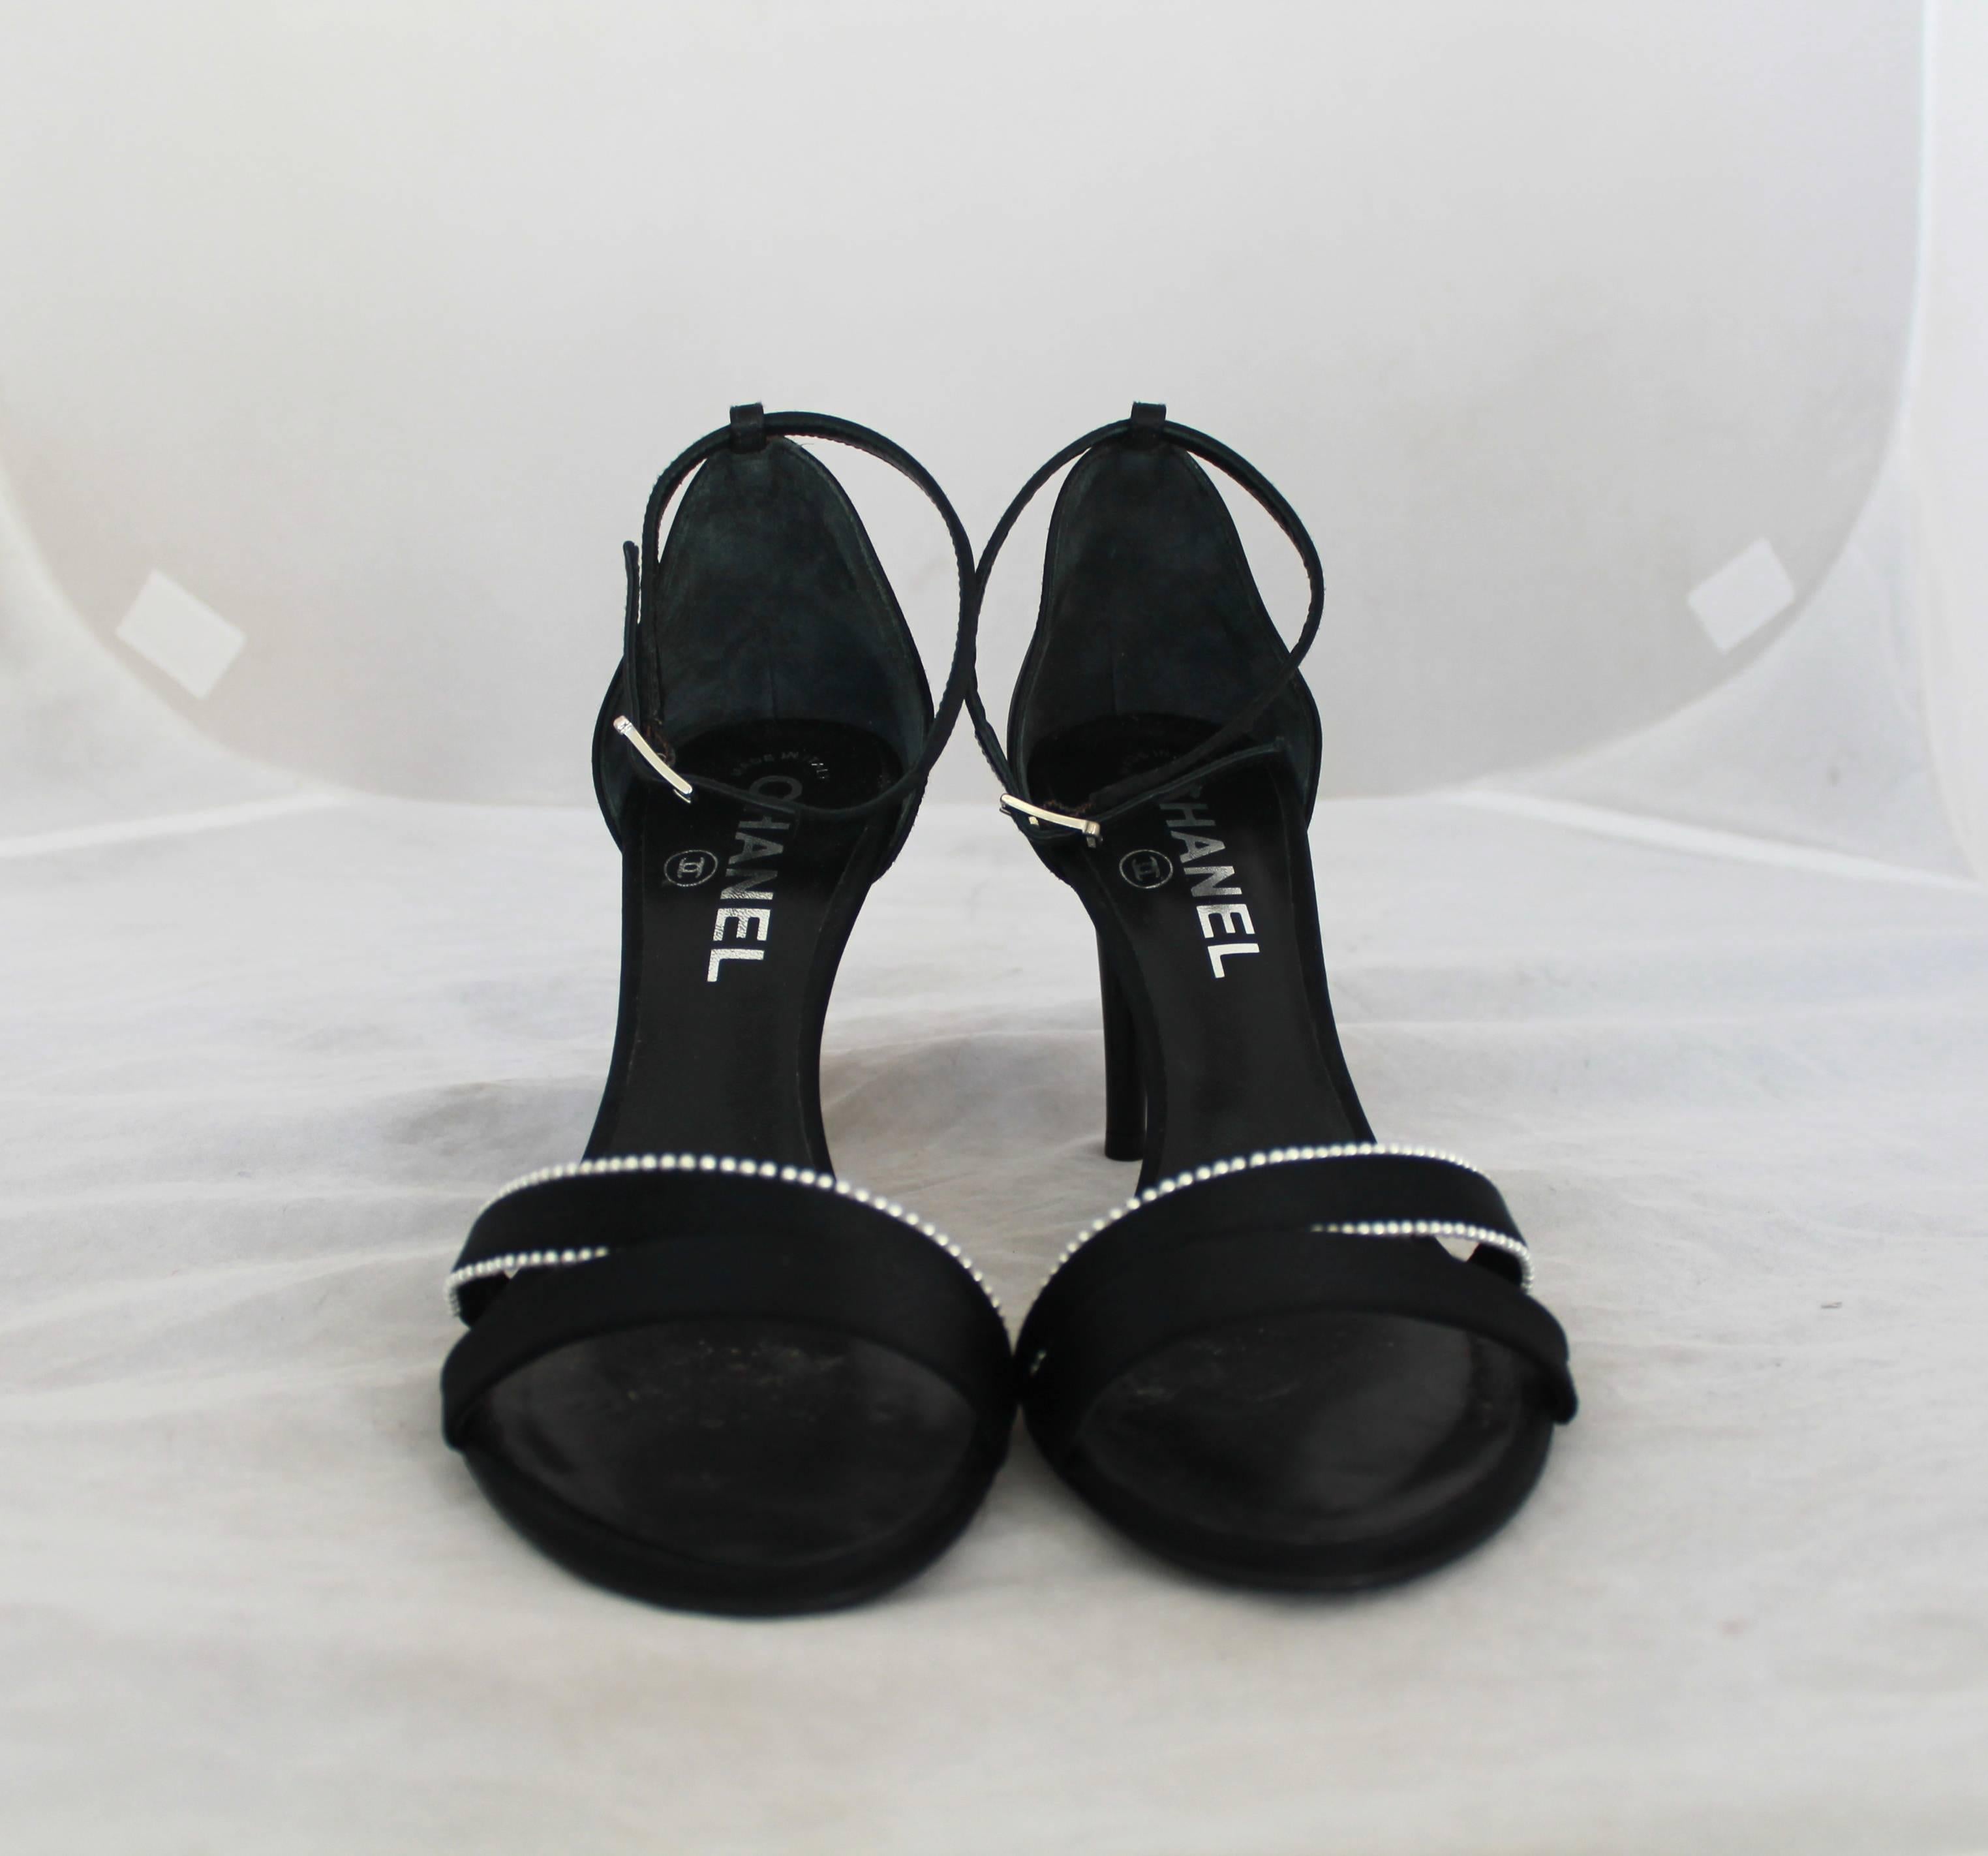 Chanel Black Satin Double Front Strap Heels w/ Ankle Strap & Mini Pearl Trim - 37.  These double front strap heels have an elegant ankle strap and a beautiful mini pearl trim.  They have a silver 